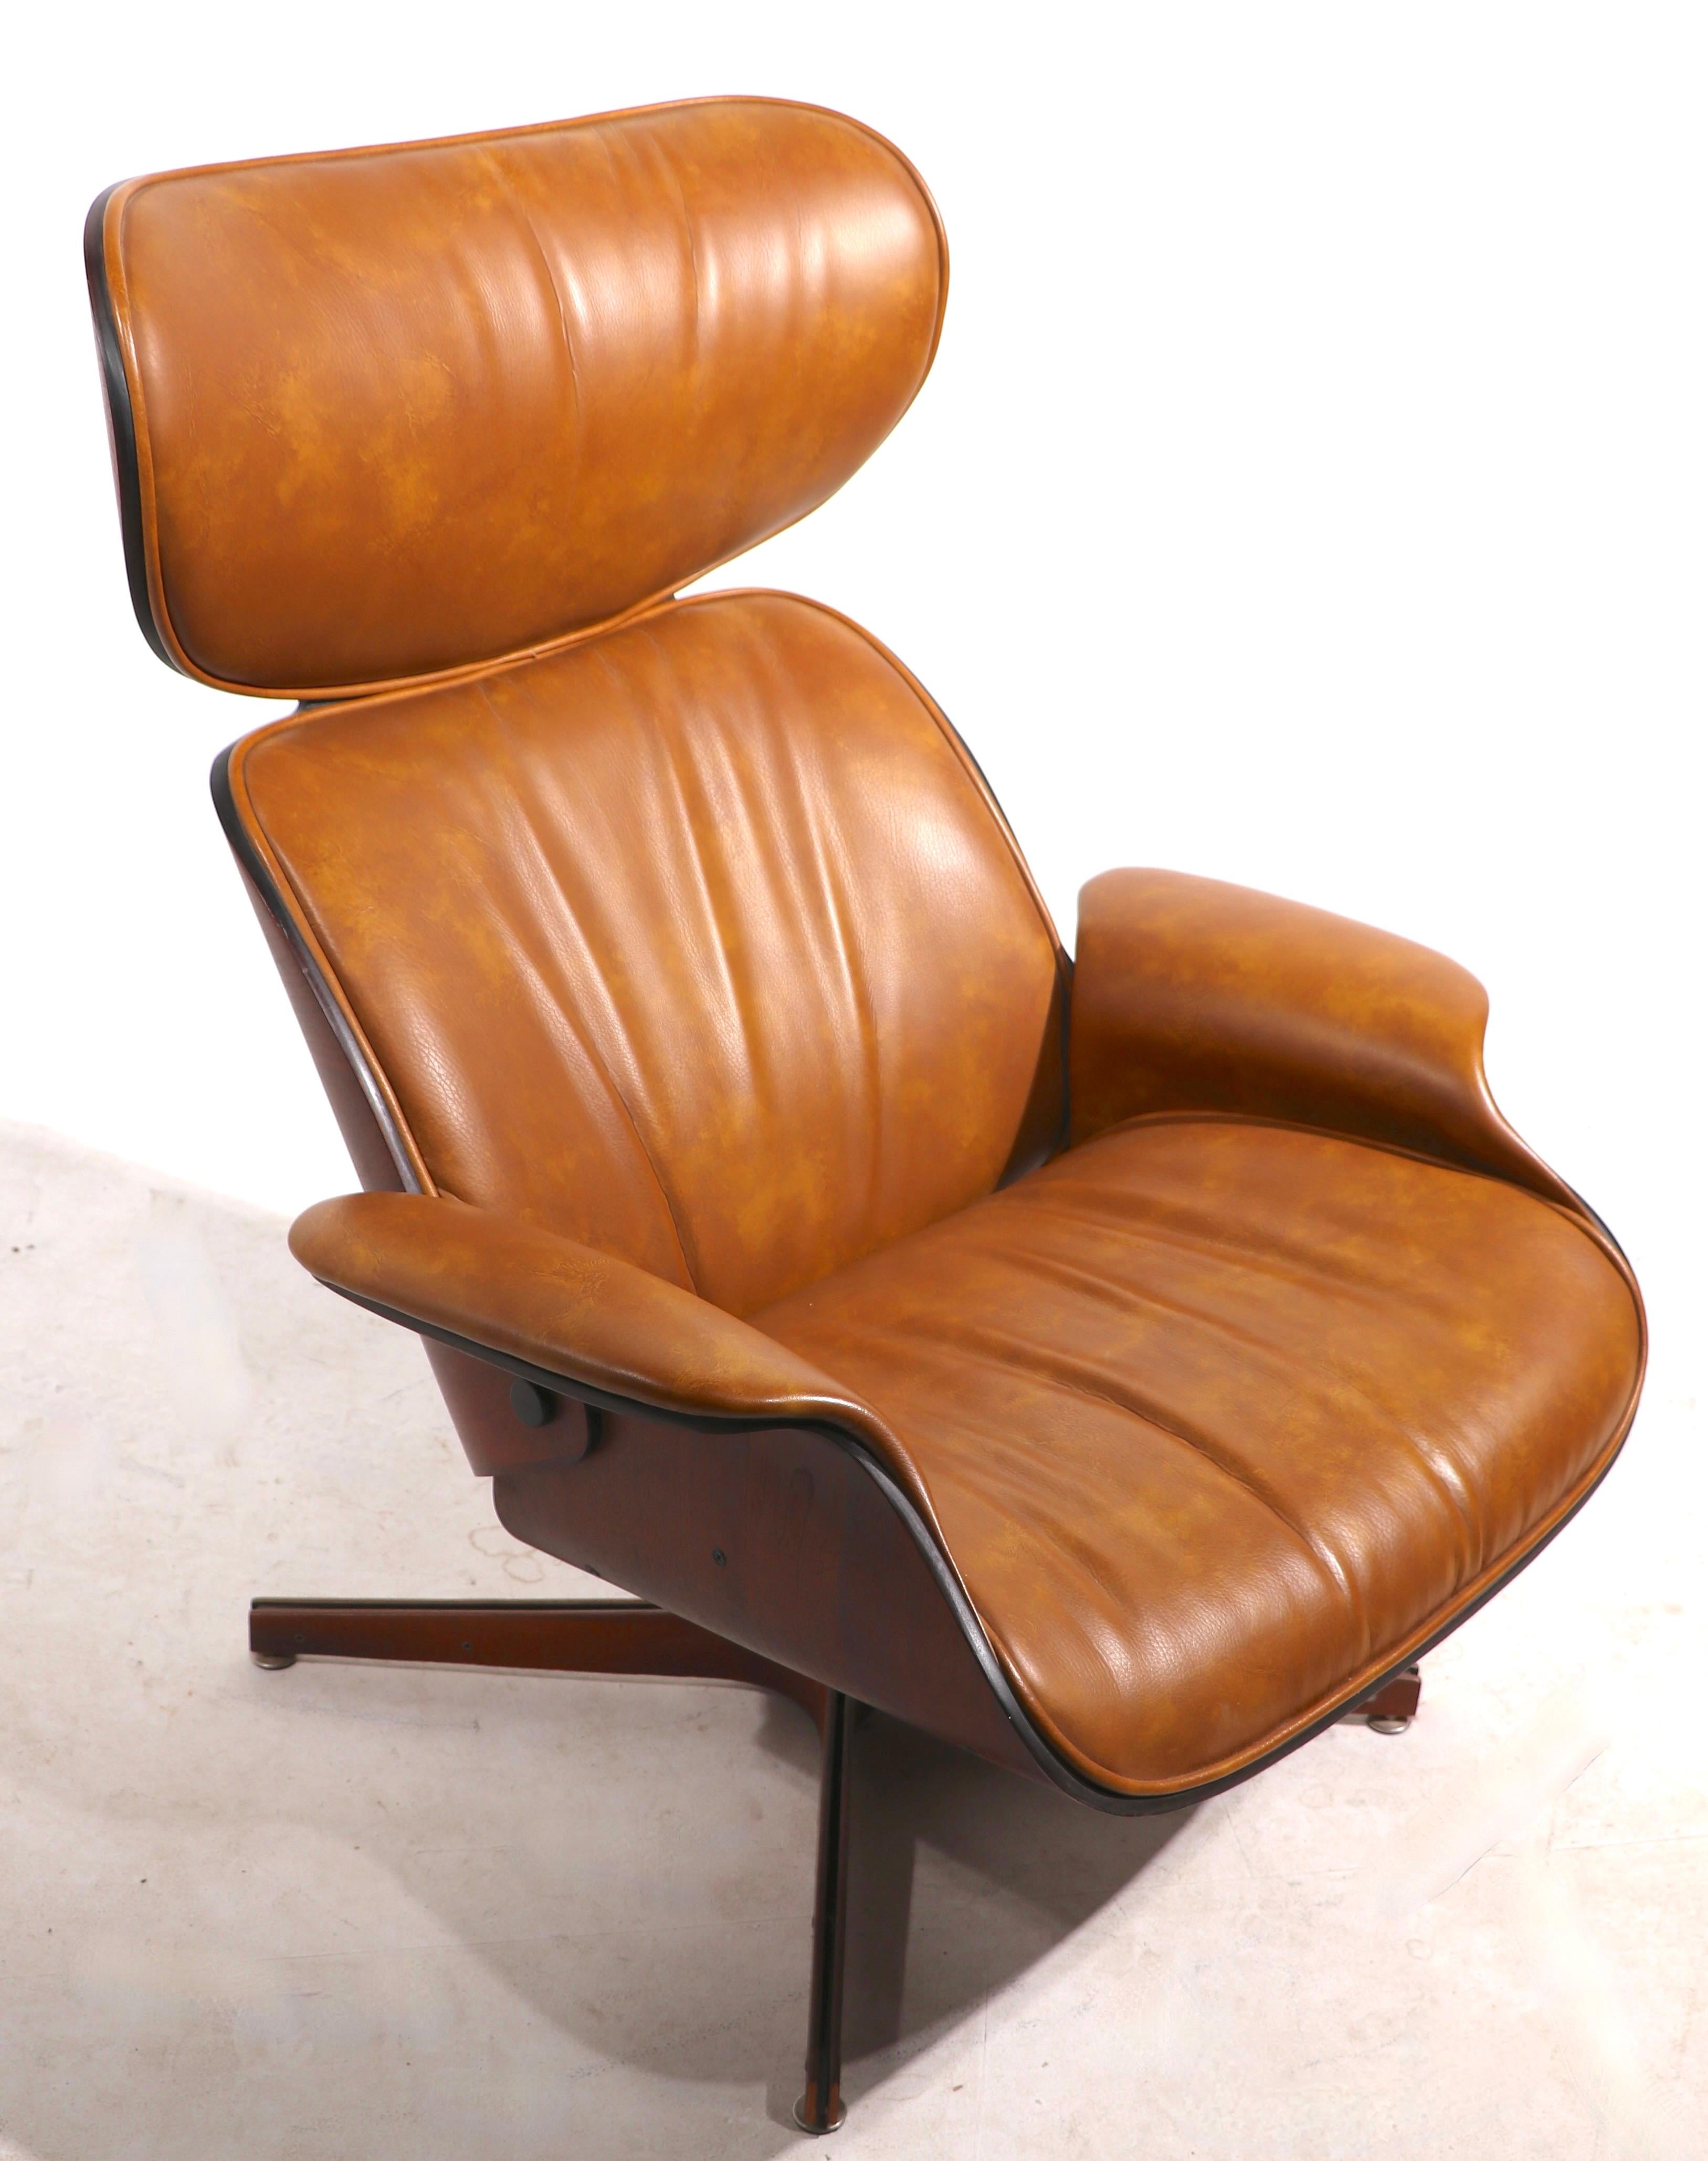 Iconic mid century swivel tilt lounge chair and ottoman designed by George Mulhauser for Plycraft. Sculptural bent ply shell, with vinyl upholstery. This example is in very fine, original condition, clean and ready to use. 
 Chair dimensions:
